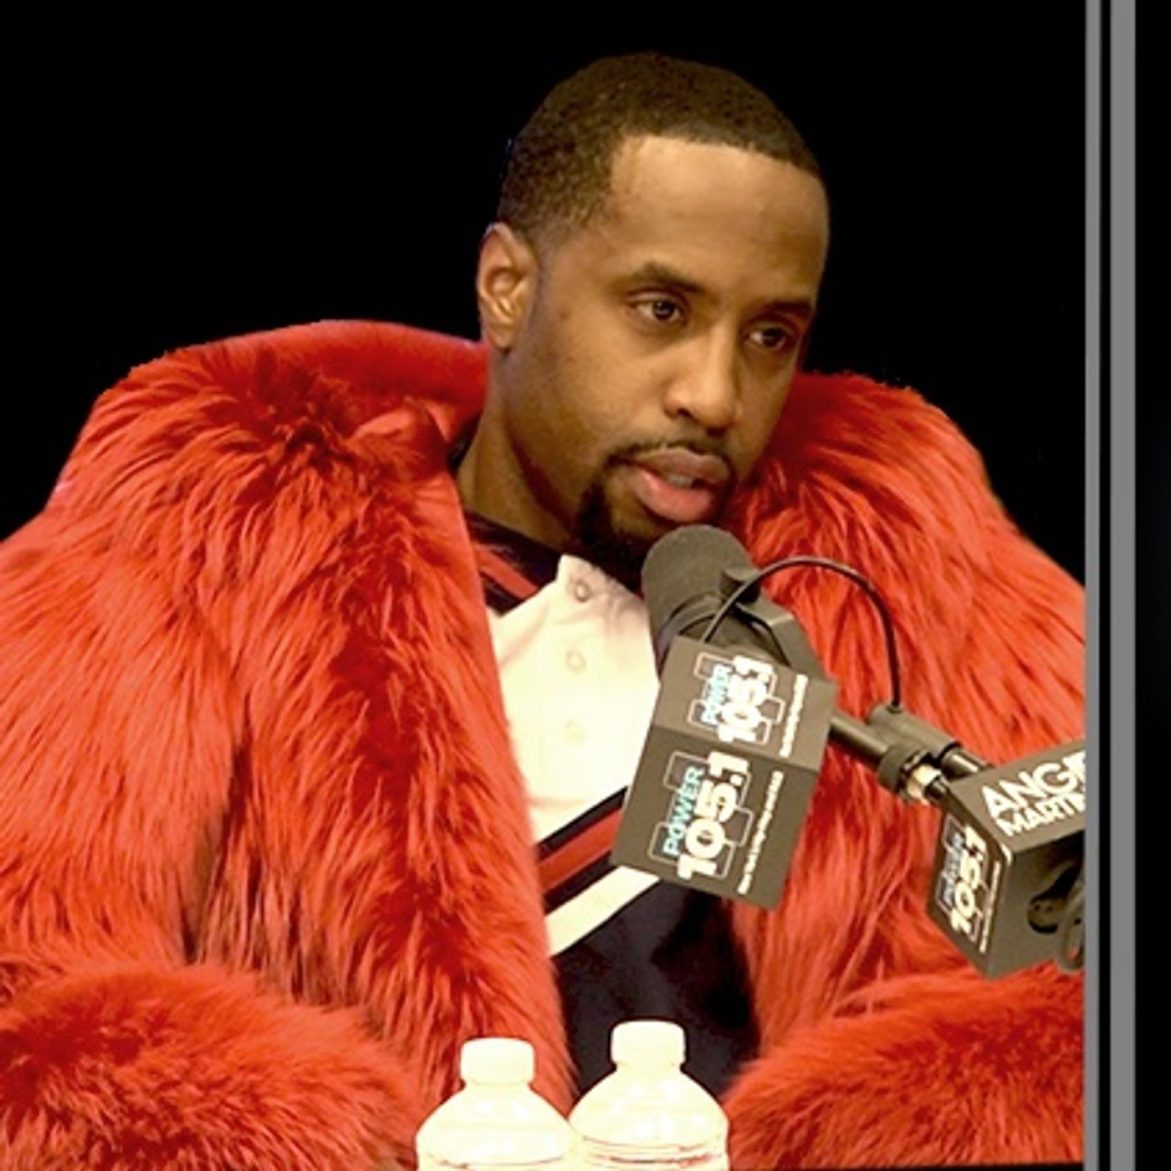 Black Podcasting - Safaree Samuels Robbed At Gun Point & Shares Traumatic Experience